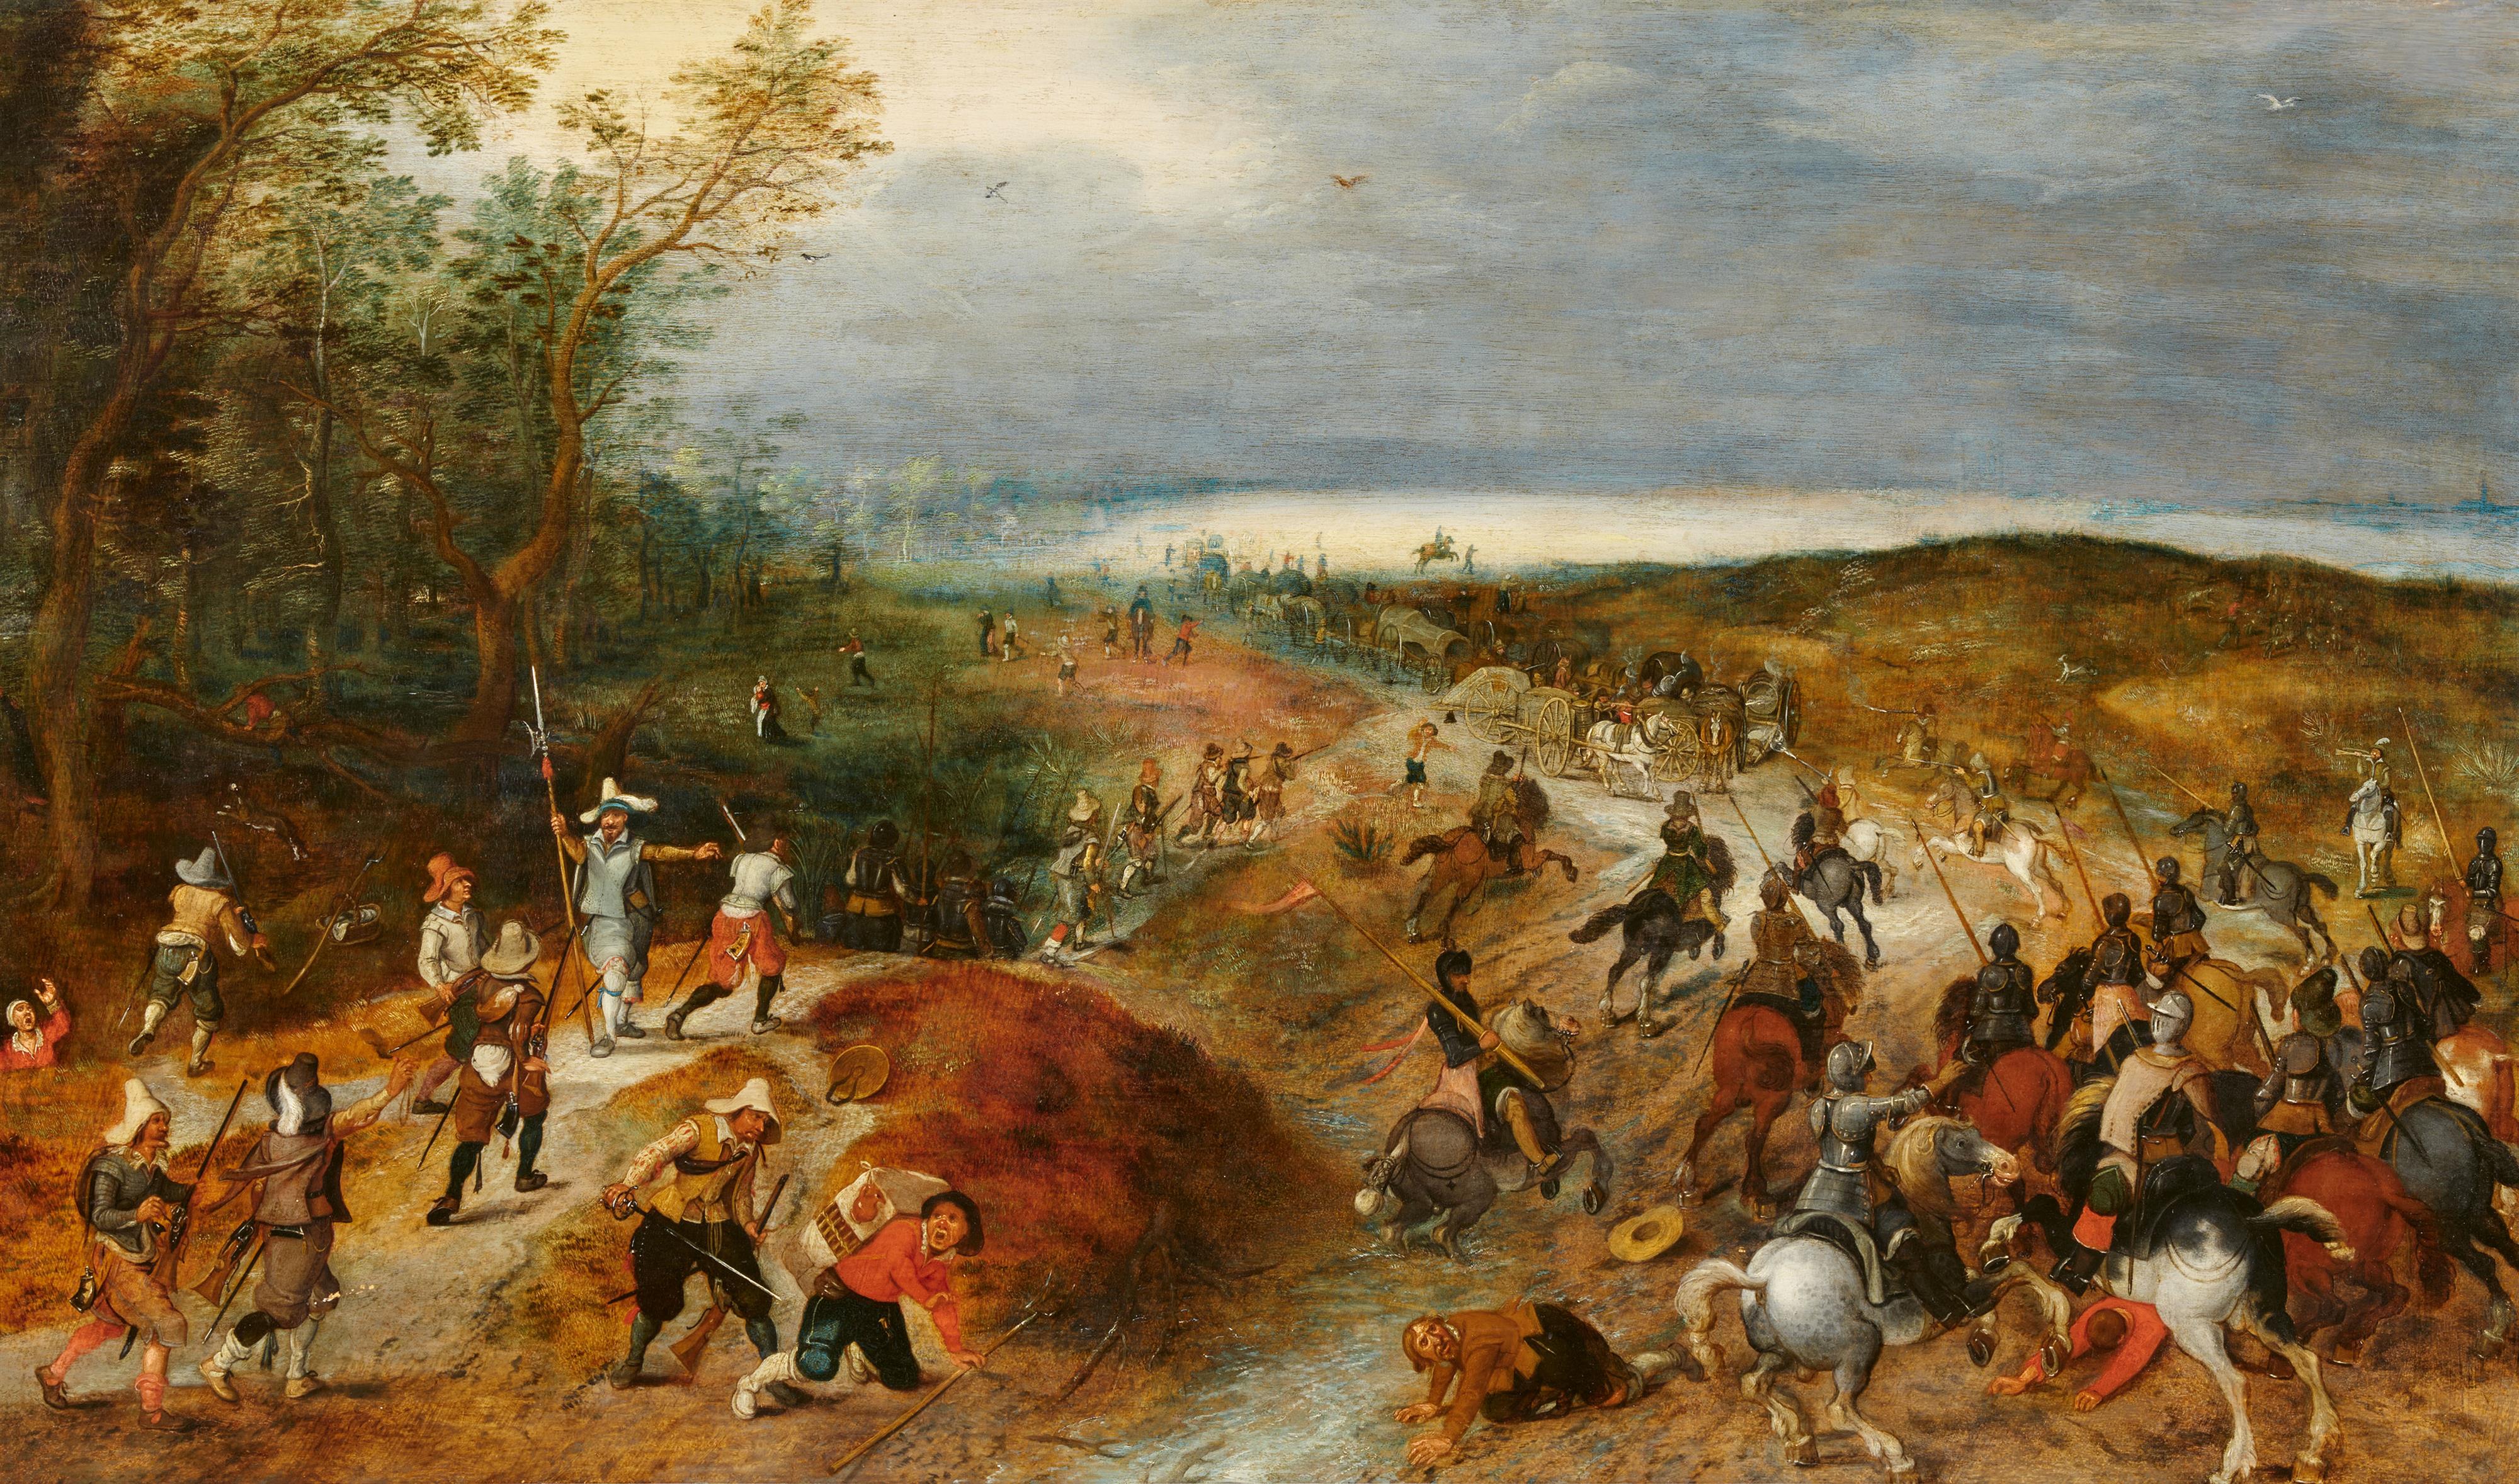 Jan Brueghel the Younger
Sebastiaan Vrancx circle of - Robbery on a Country Road - image-1